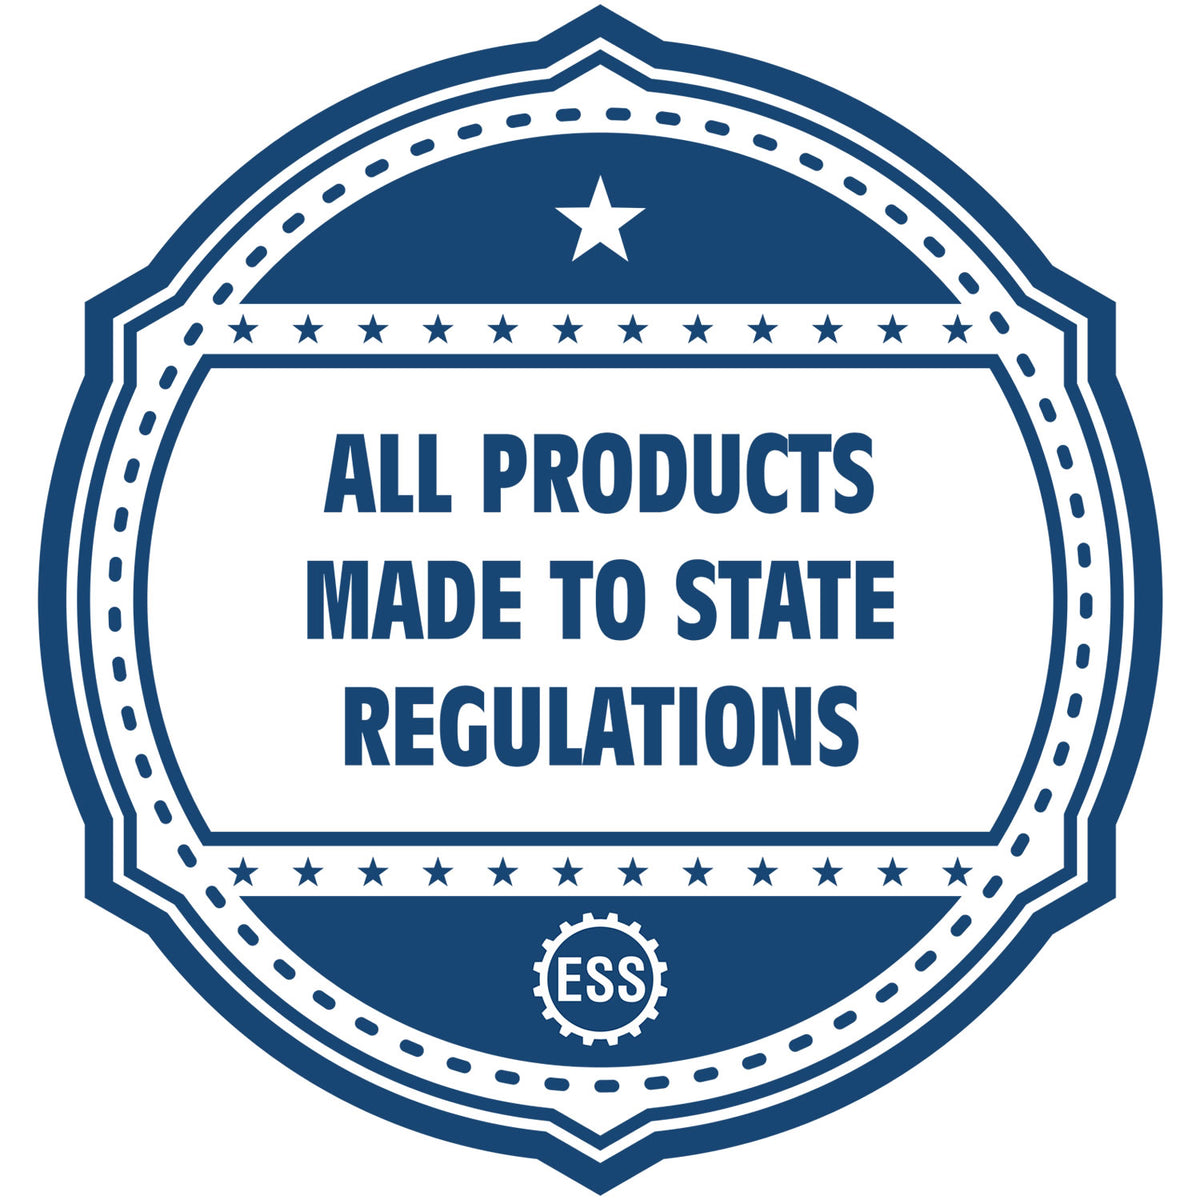 An icon or badge element for the Long Reach Idaho PE Seal showing that this product is made in compliance with state regulations.